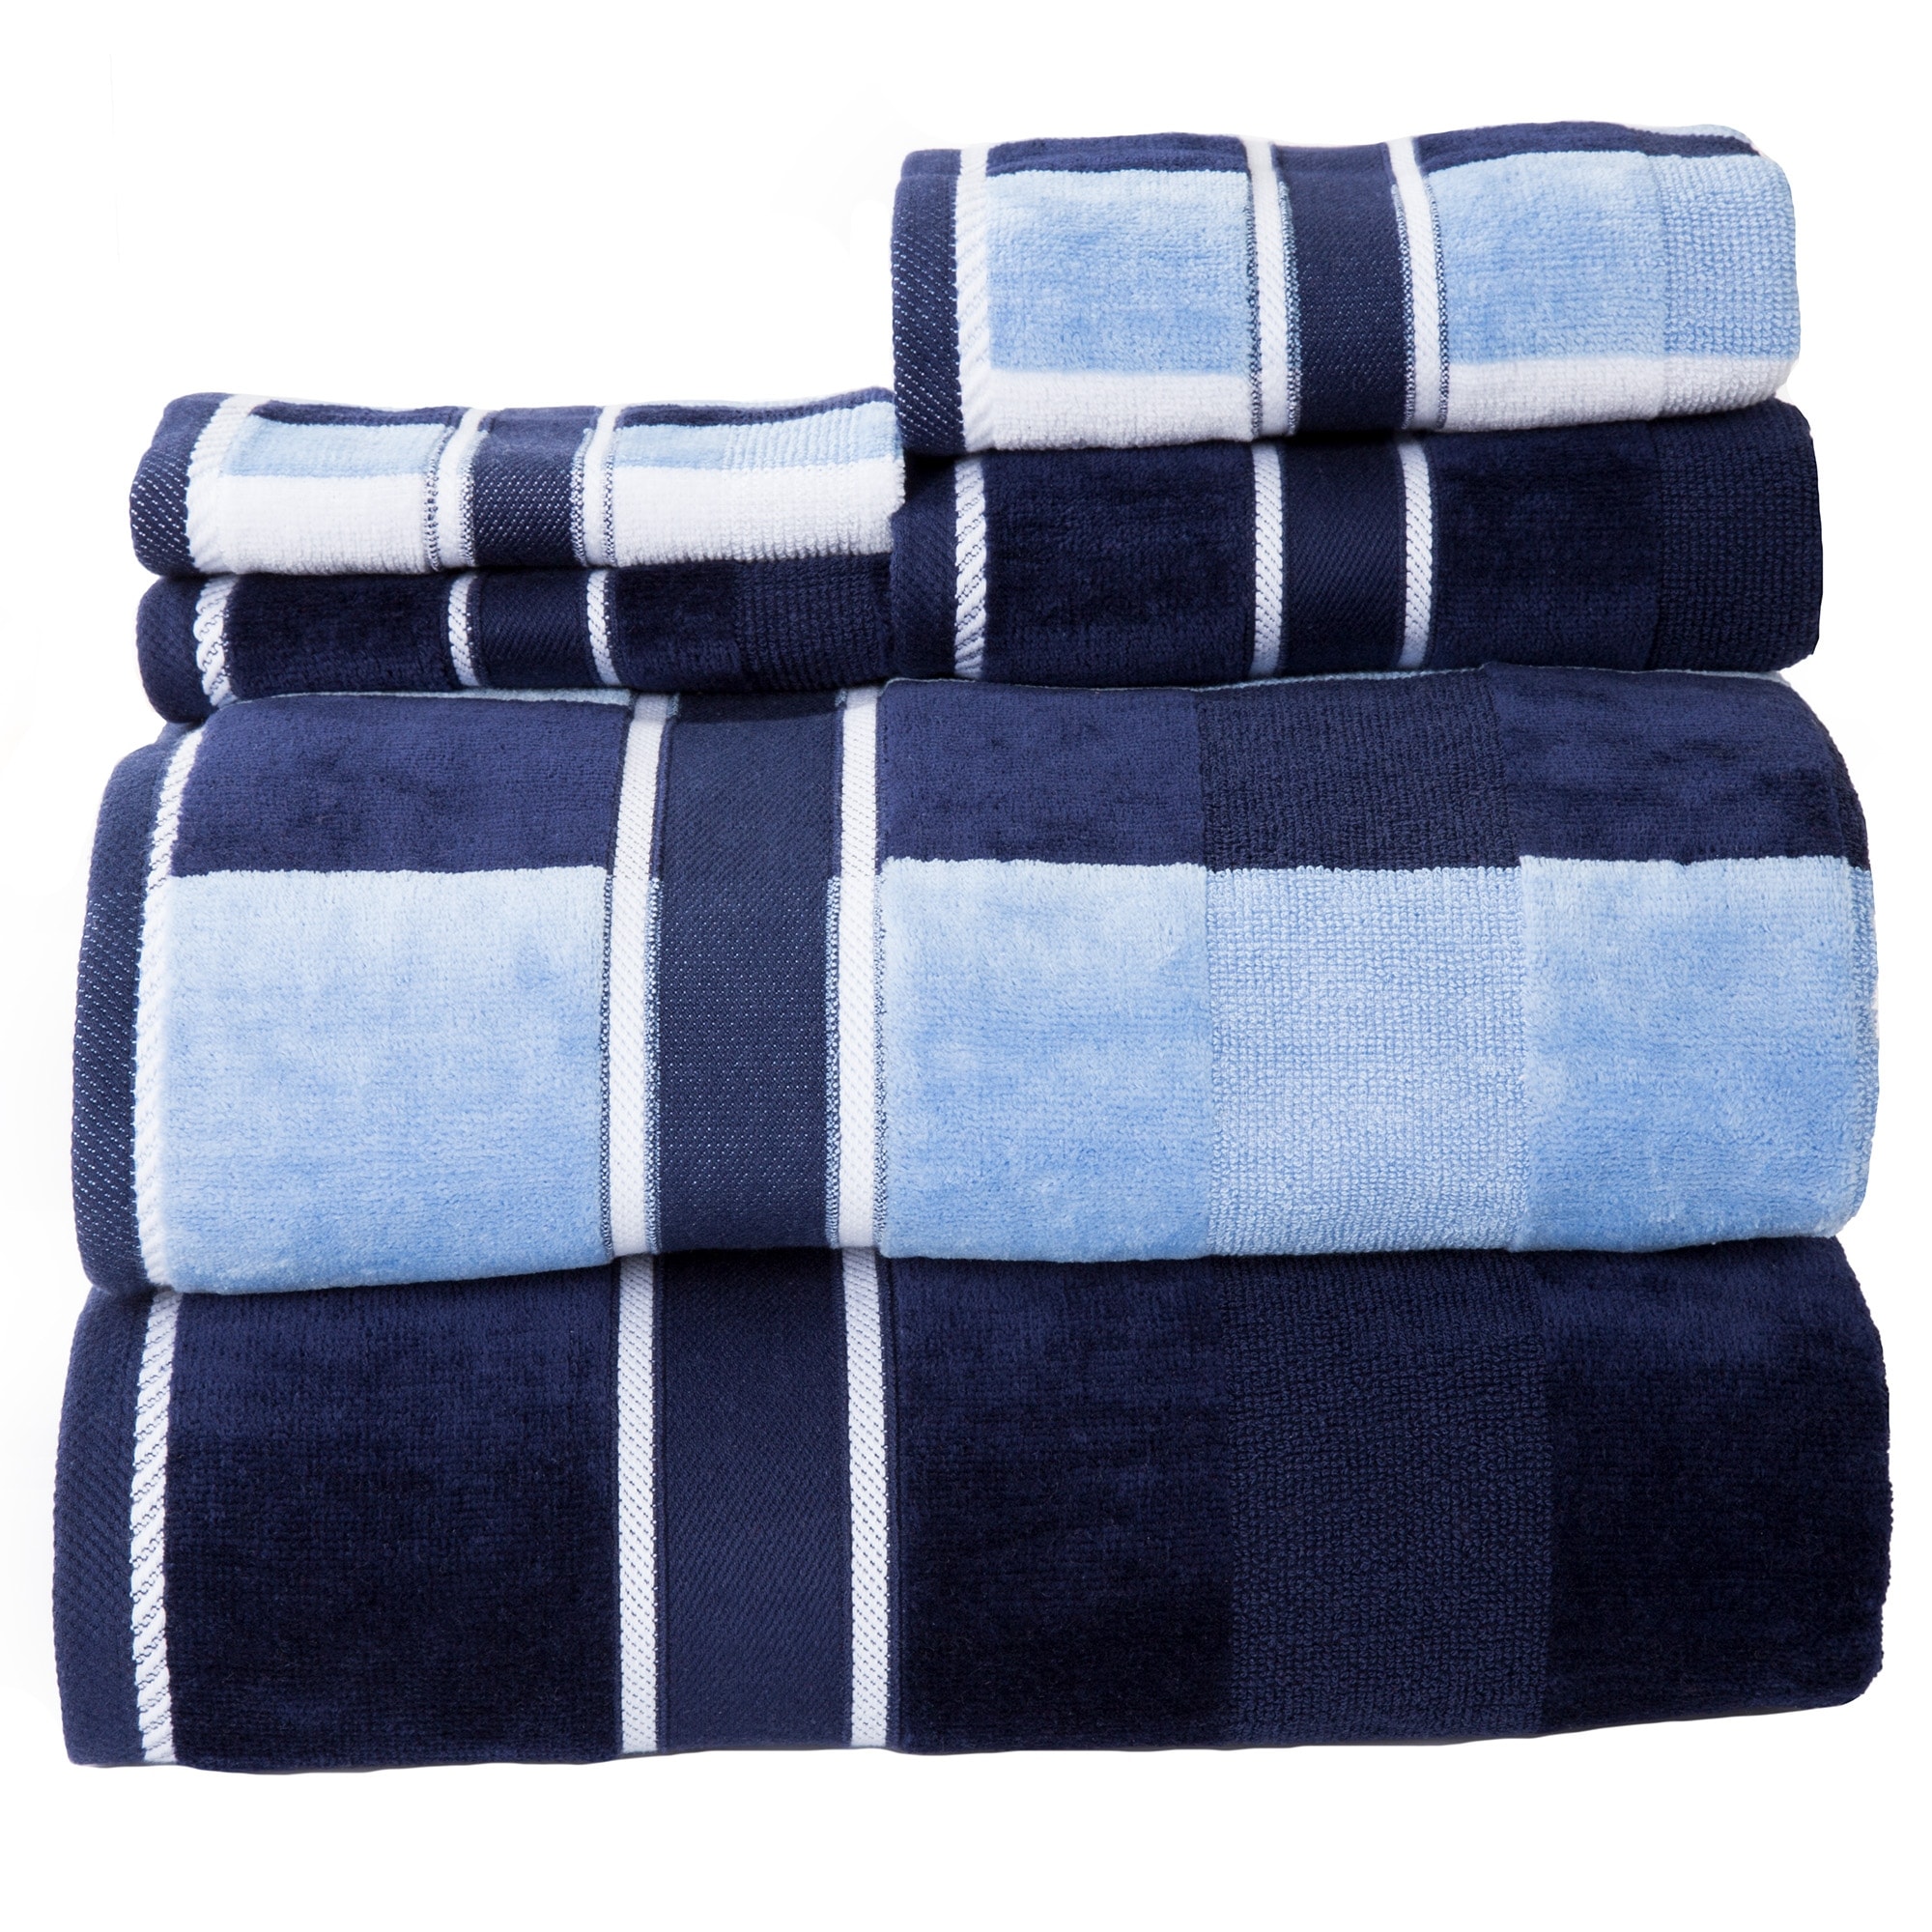 6PC Towel Set - Cotton Bathroom Accessories with 2 Bath Towels, 2 Hand  Towels, and 2 Washcloths by Windsor Home - On Sale - Bed Bath & Beyond -  10352880